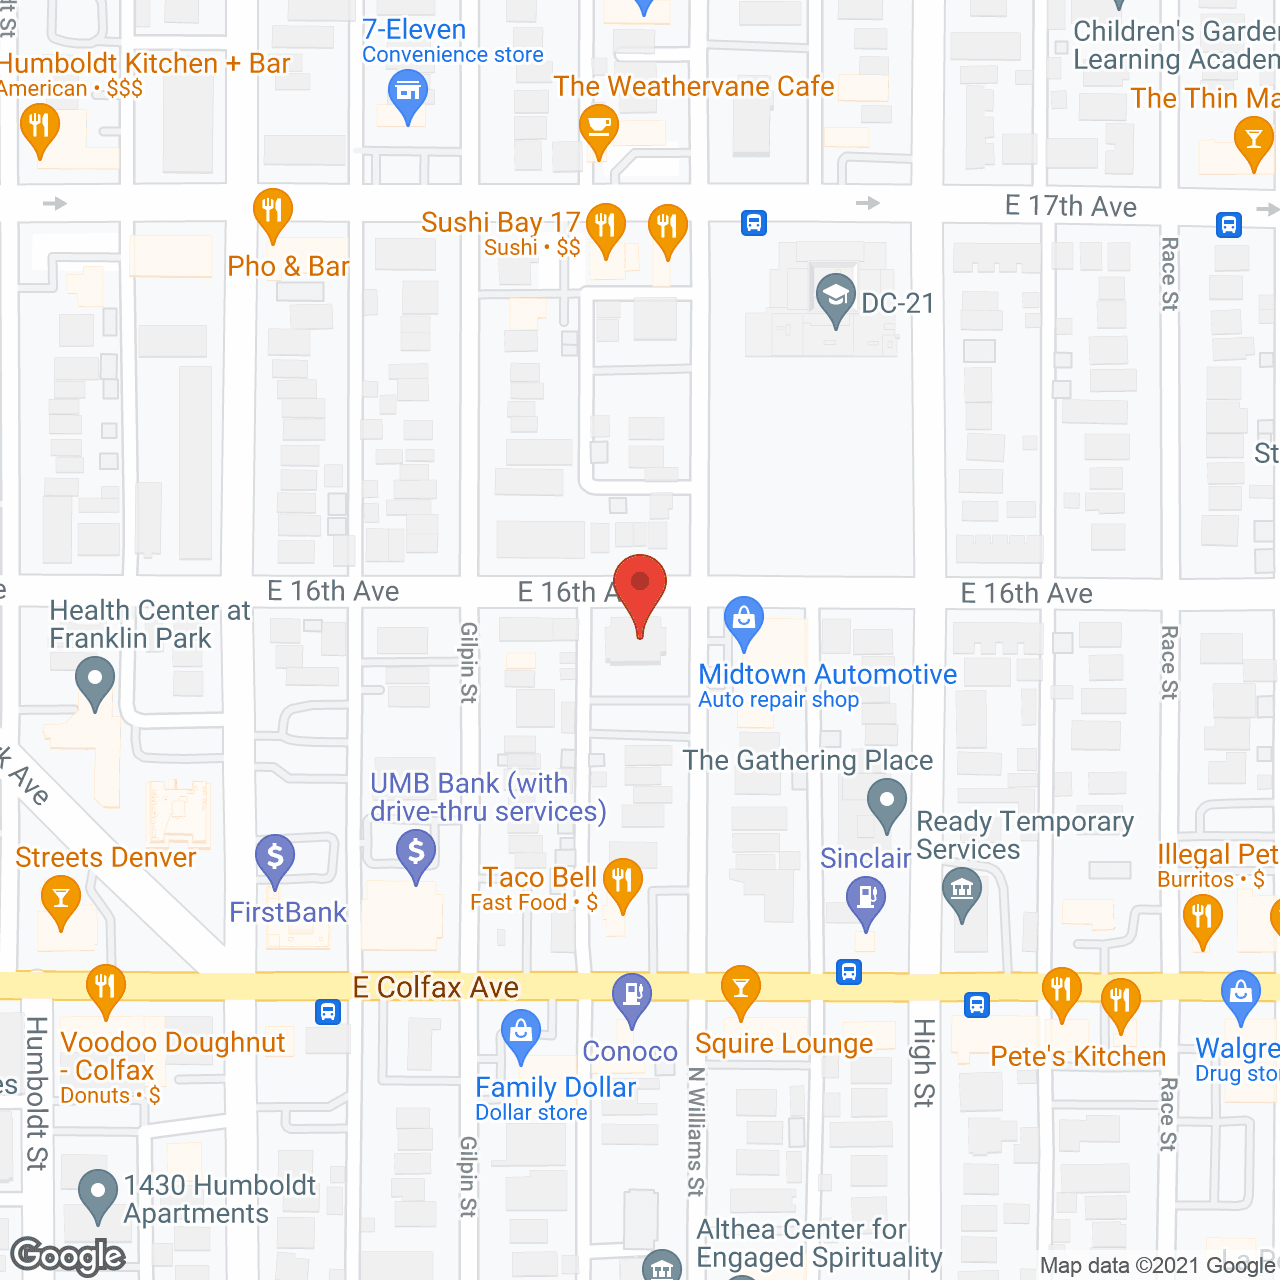 William Tell Apartments in google map